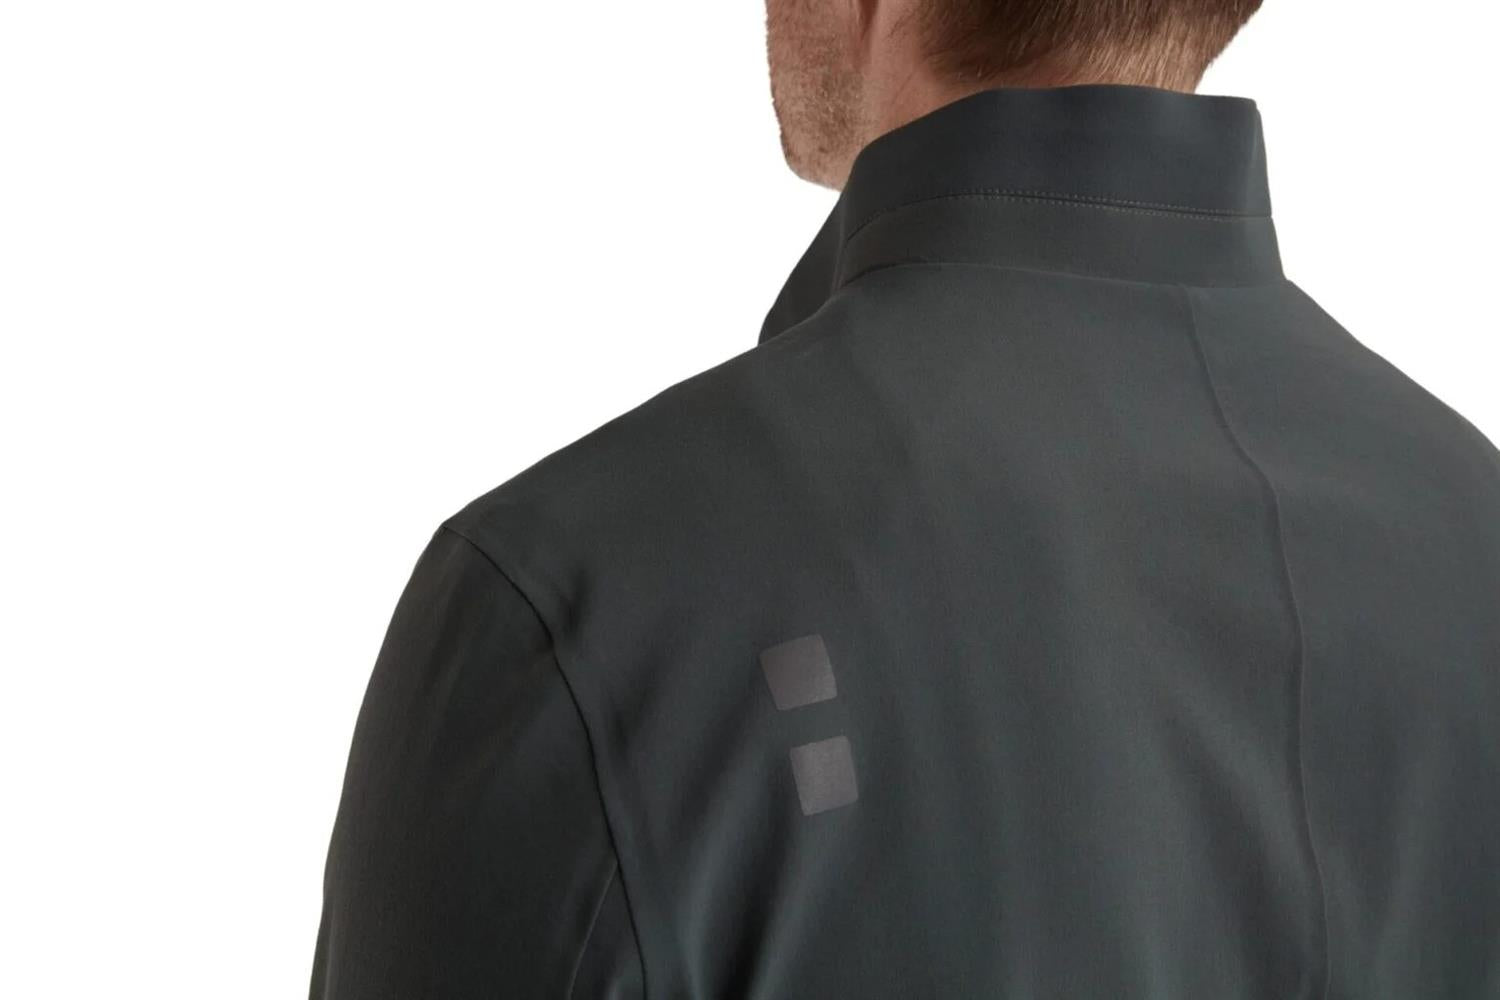 Charger Jacket